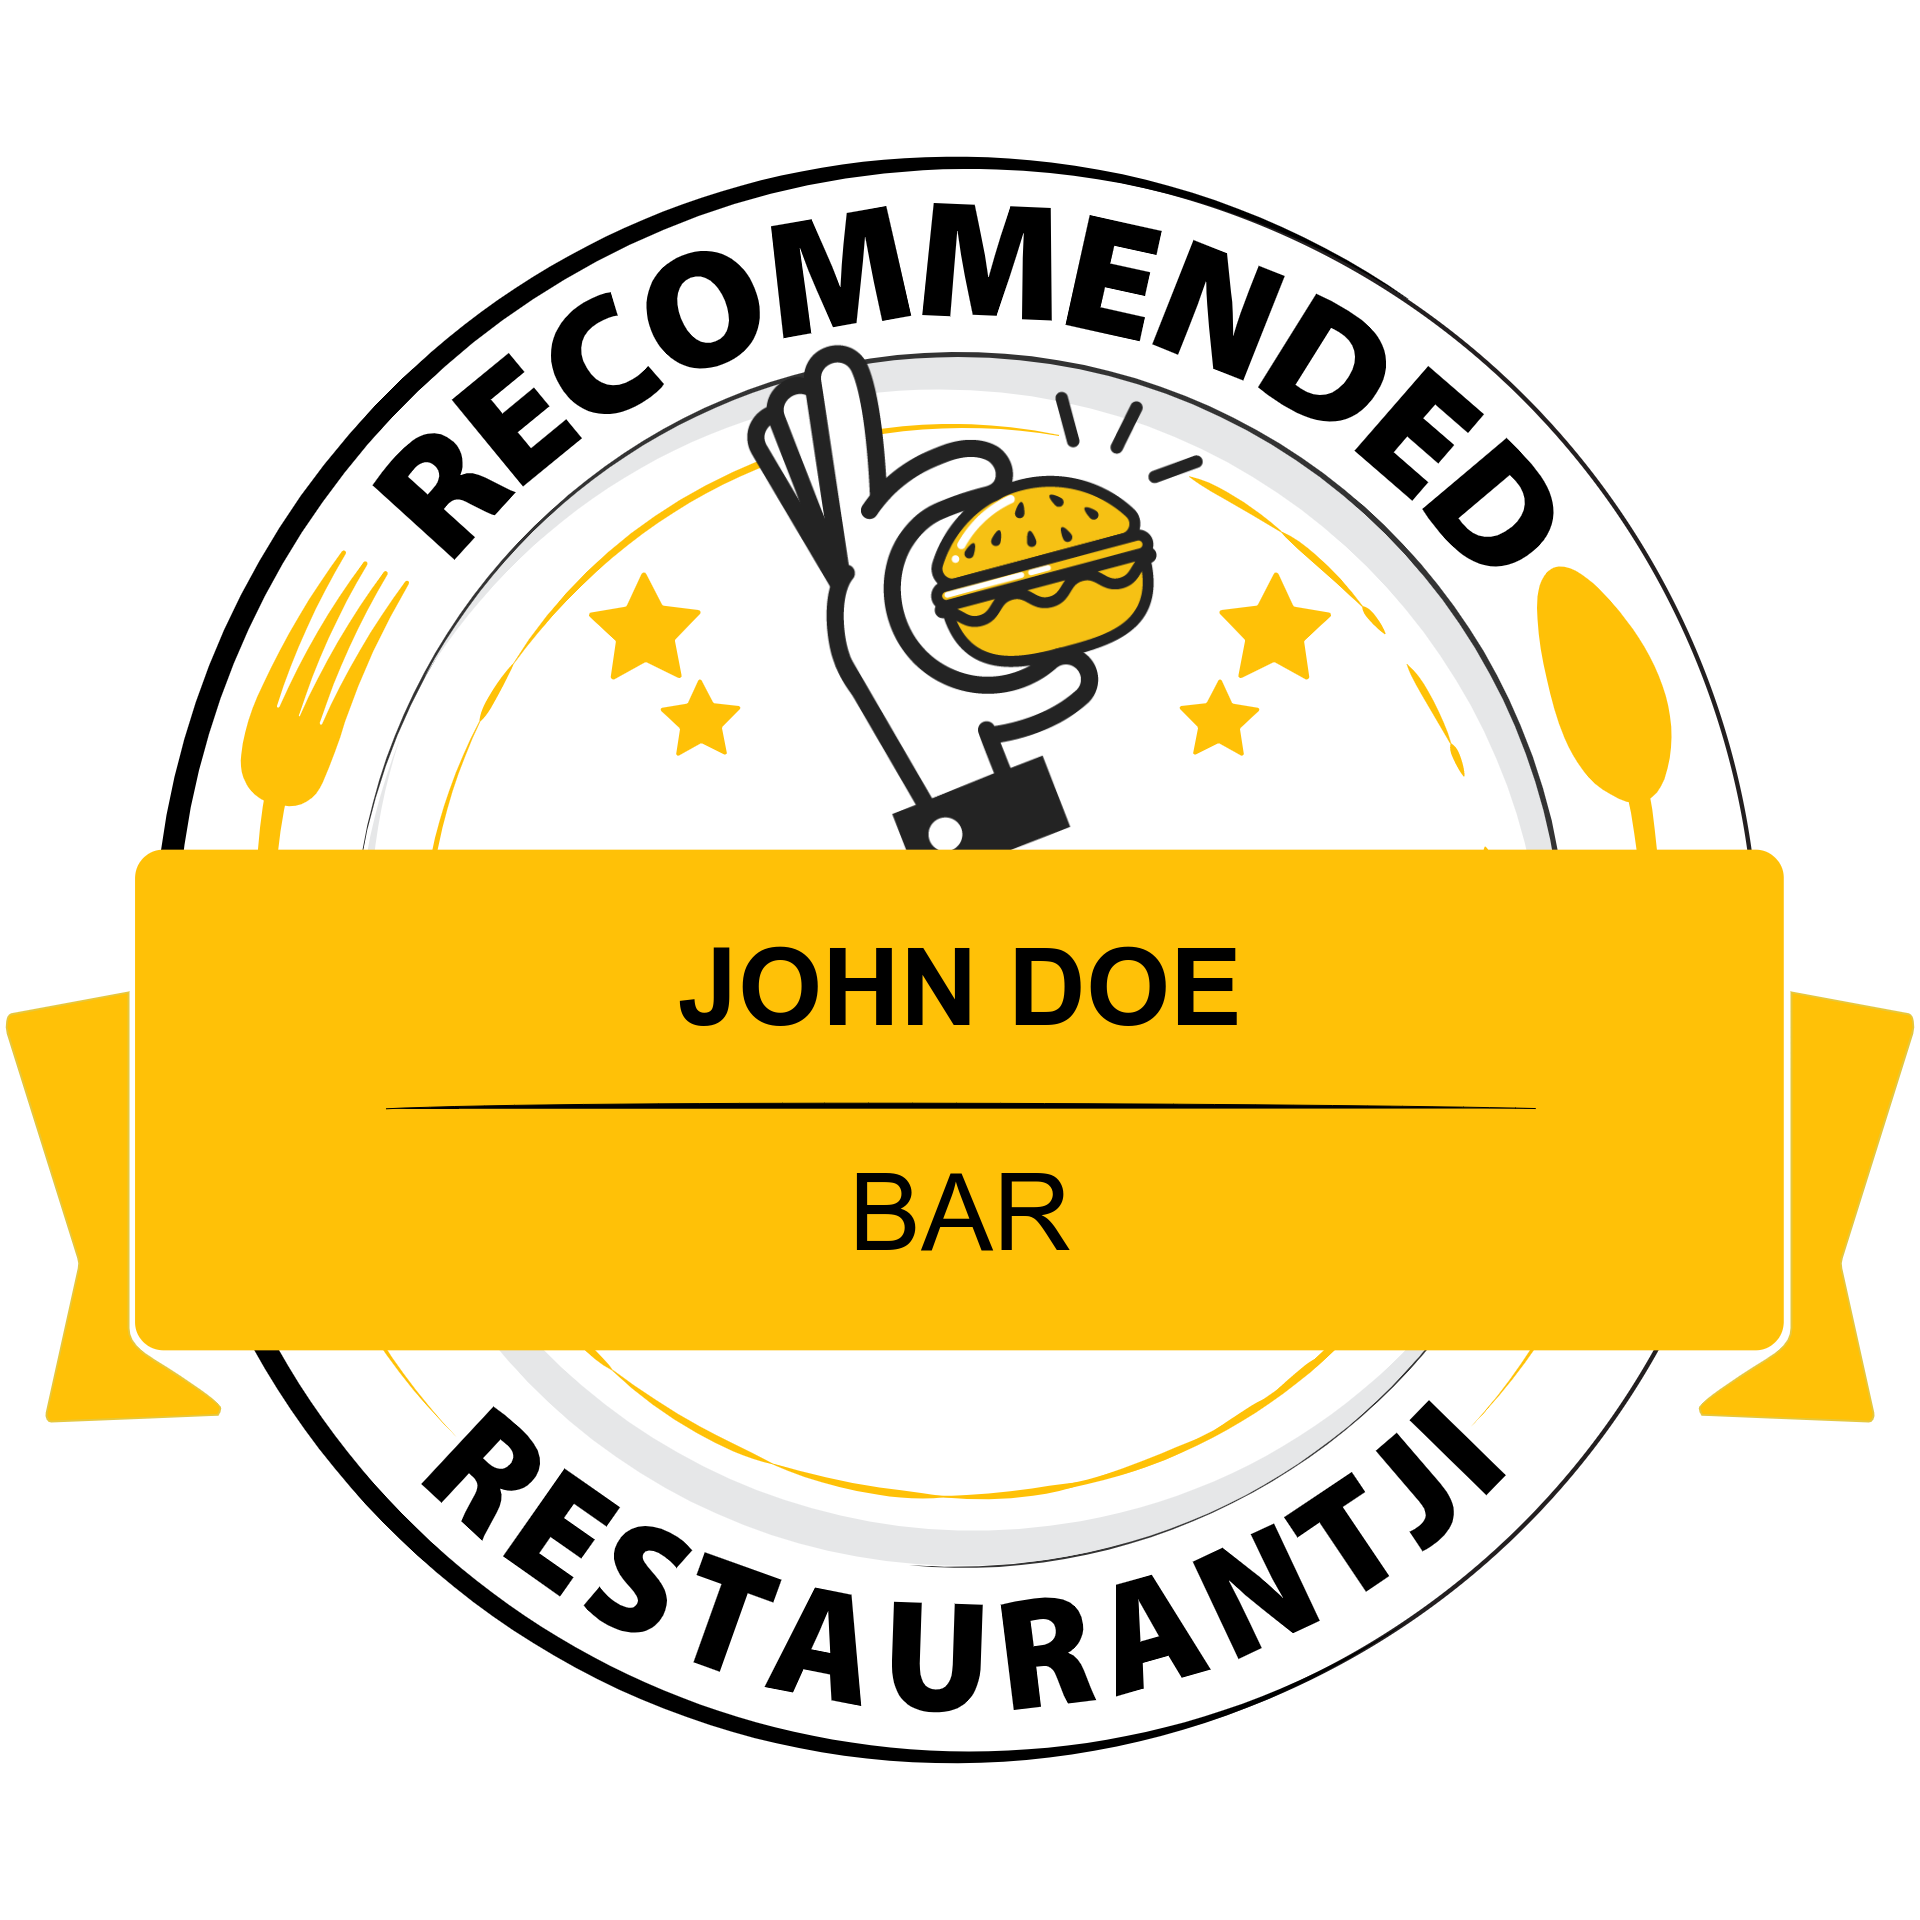 John Doe has earned accolades from Restaurantji - a user-friendly platform for discovering the finest local restaurants.